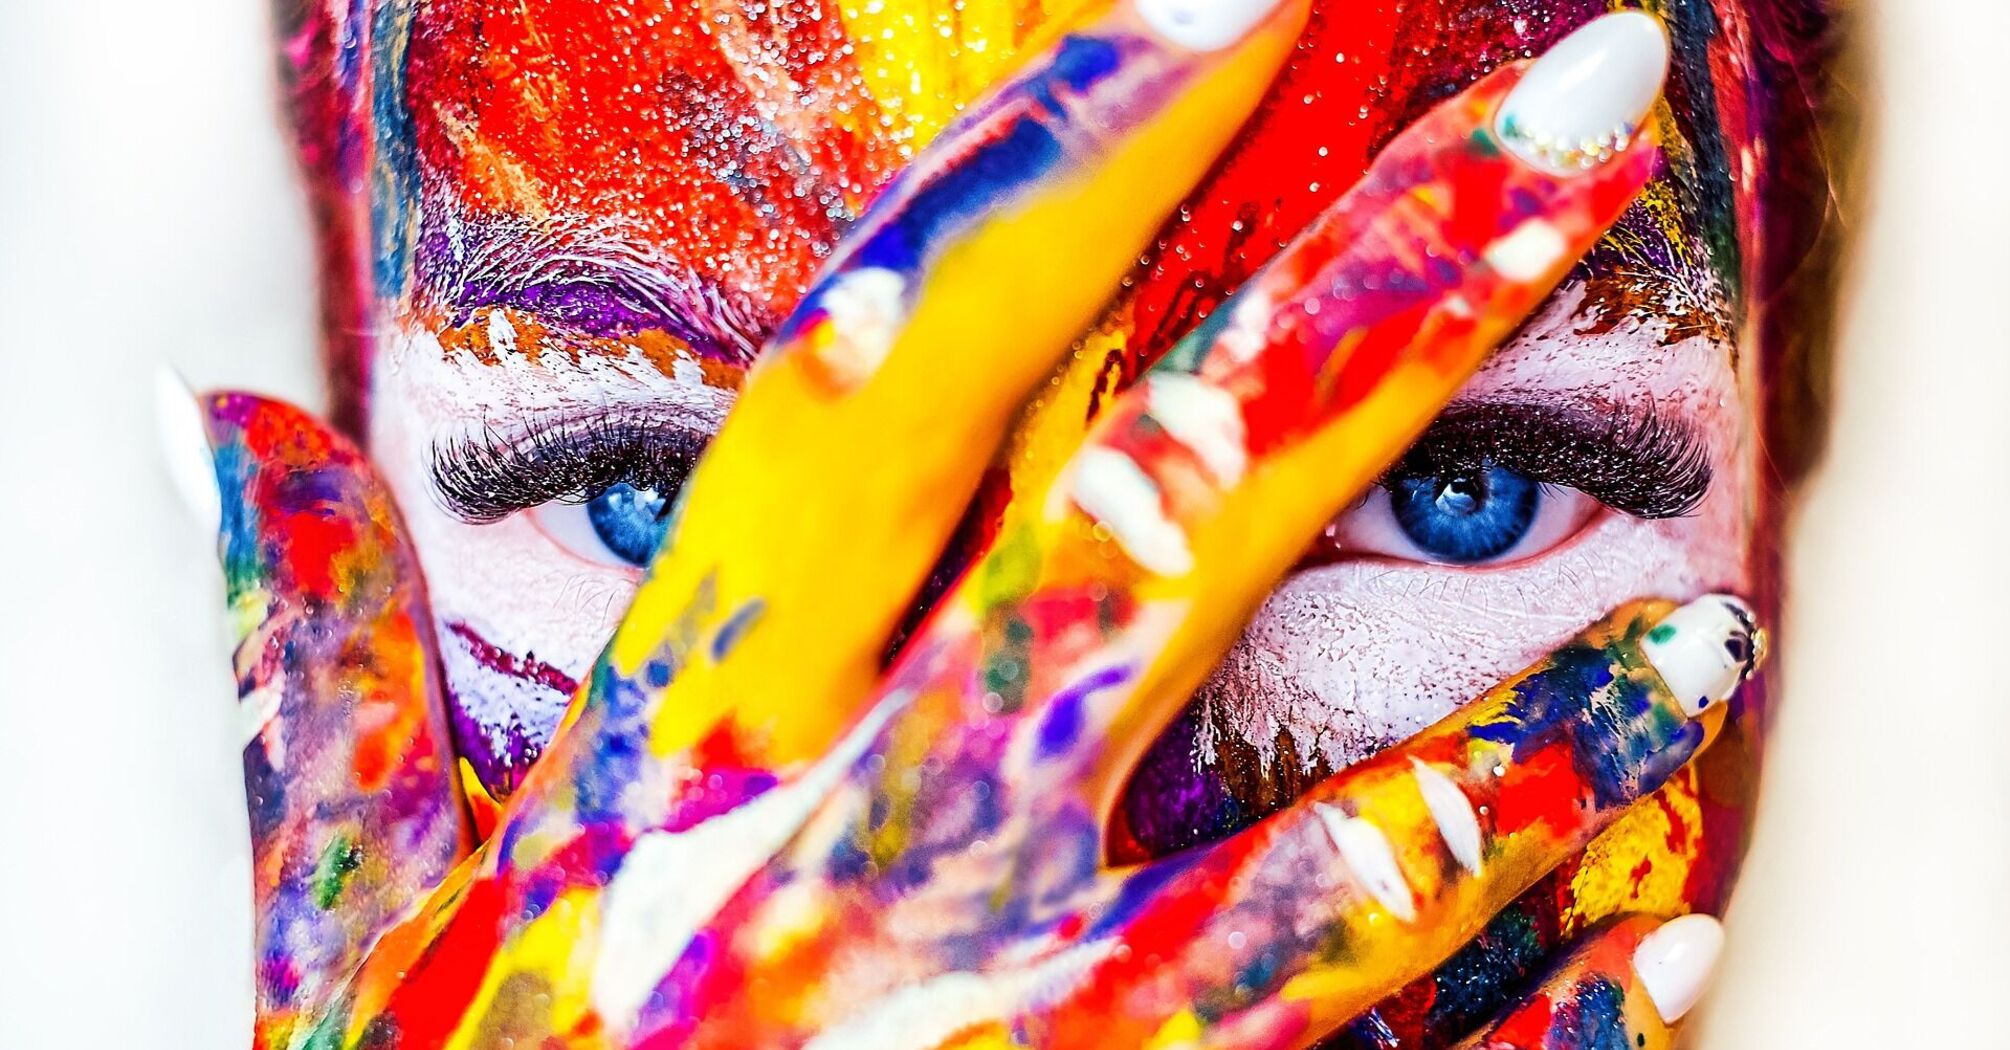 A woman with vibrant paint on her face and hand, peering through colored fingers